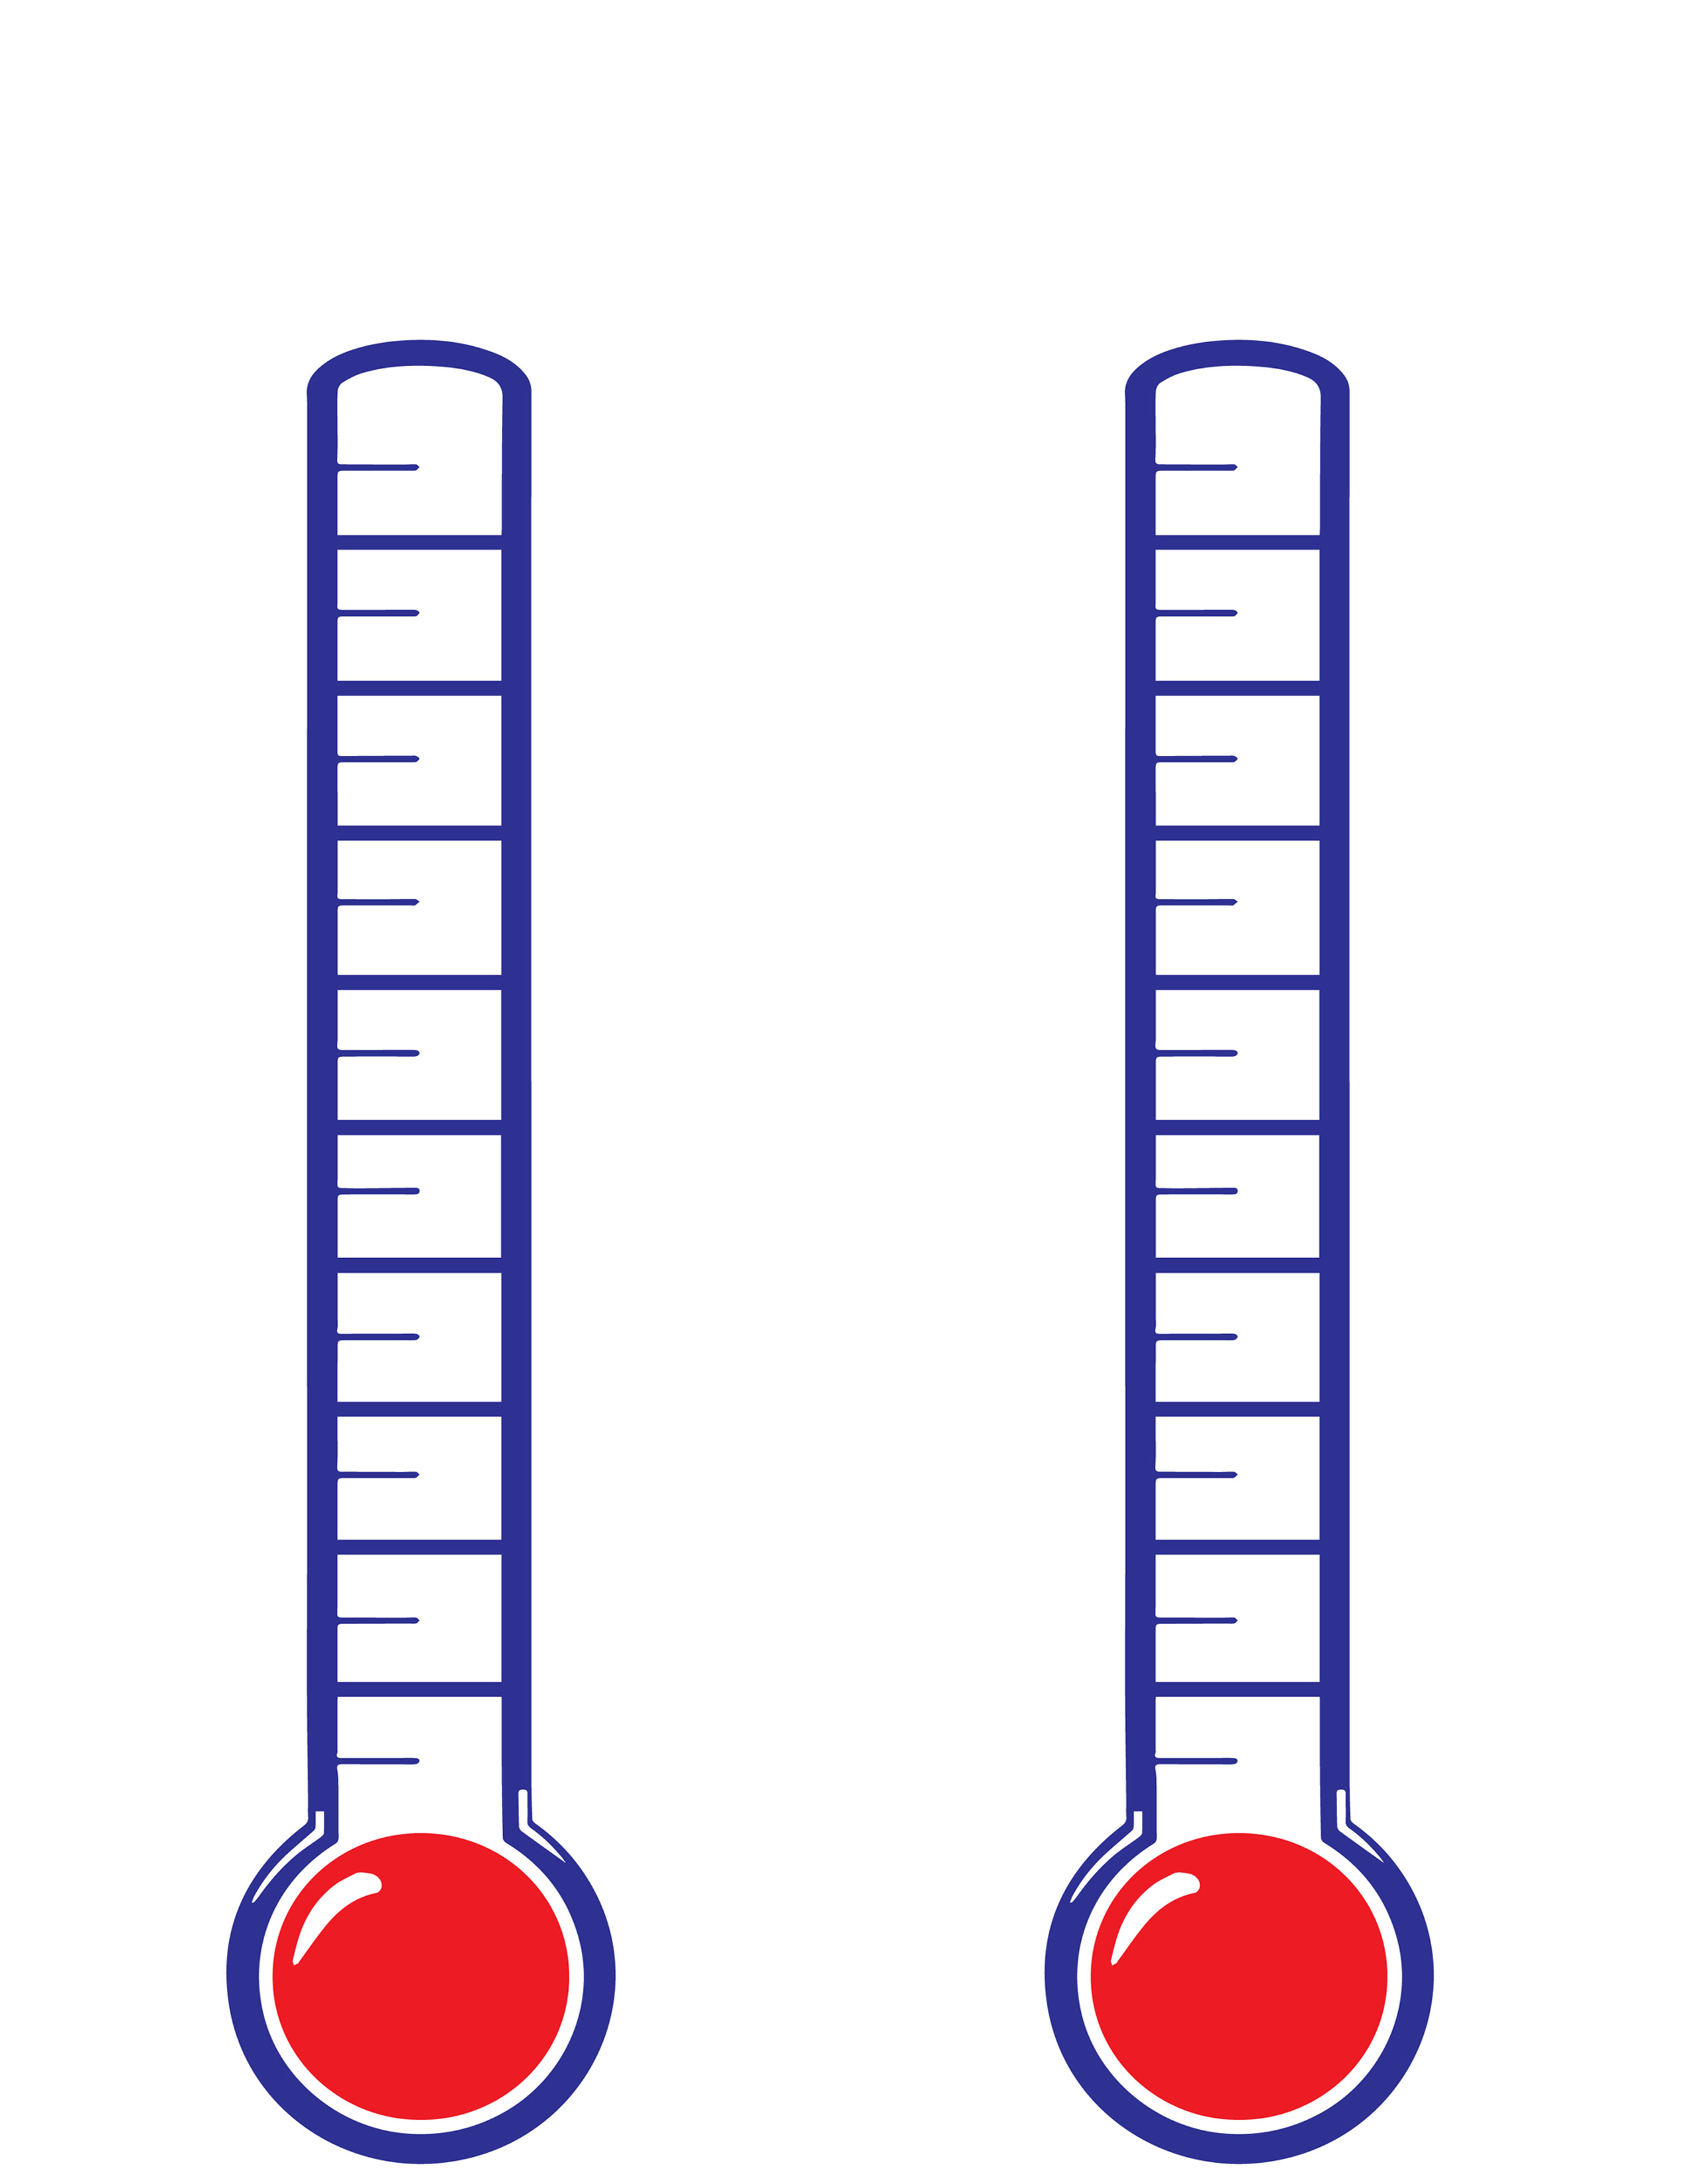 Goal thermometer template.